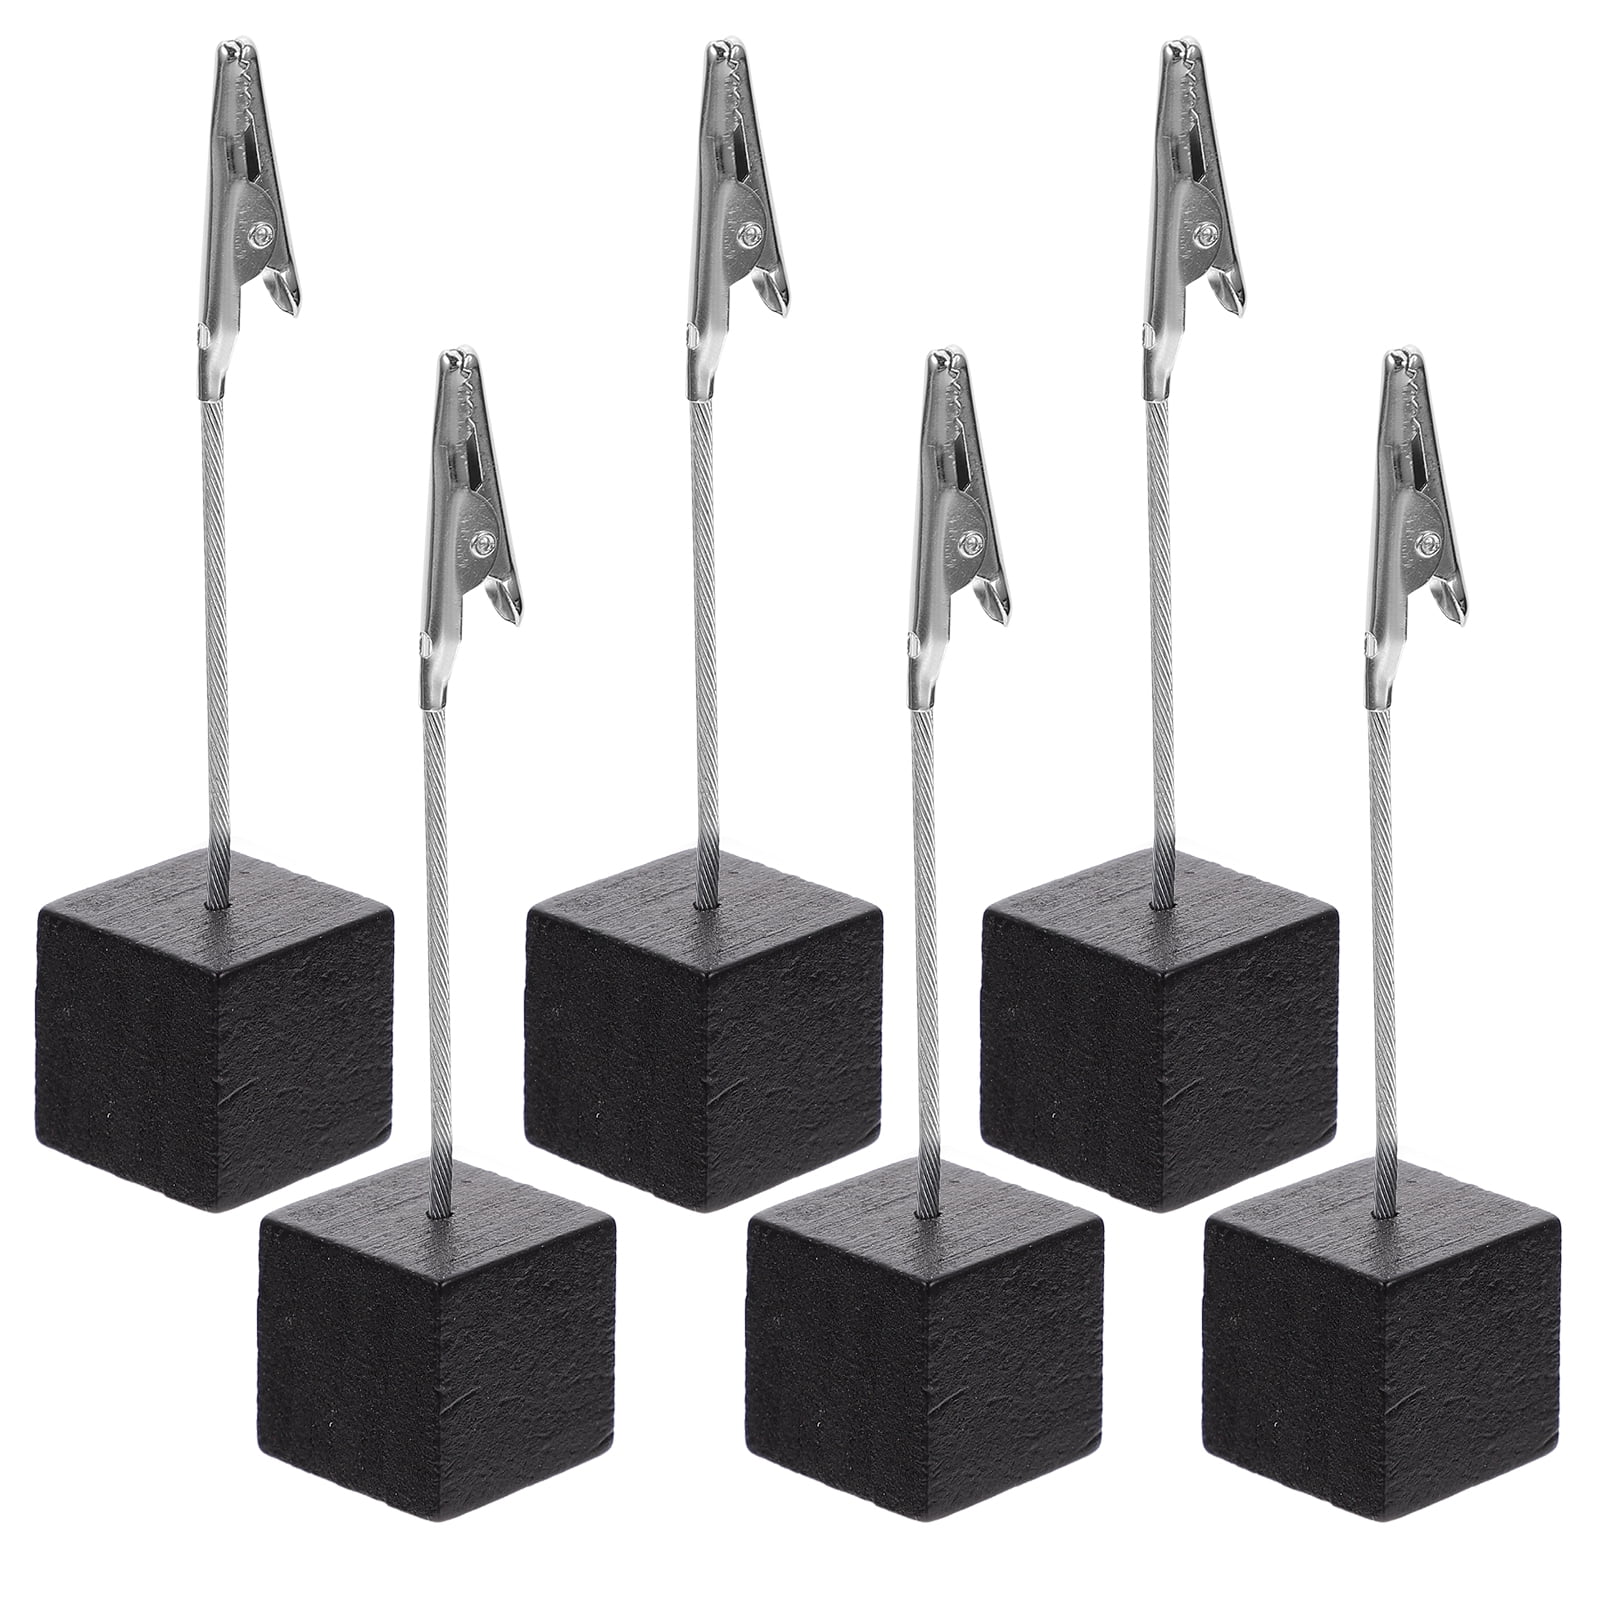 Cube Base Tree Style Memo Card Photo Holder Stand Alligator Clip 8 Branch 5  Pack